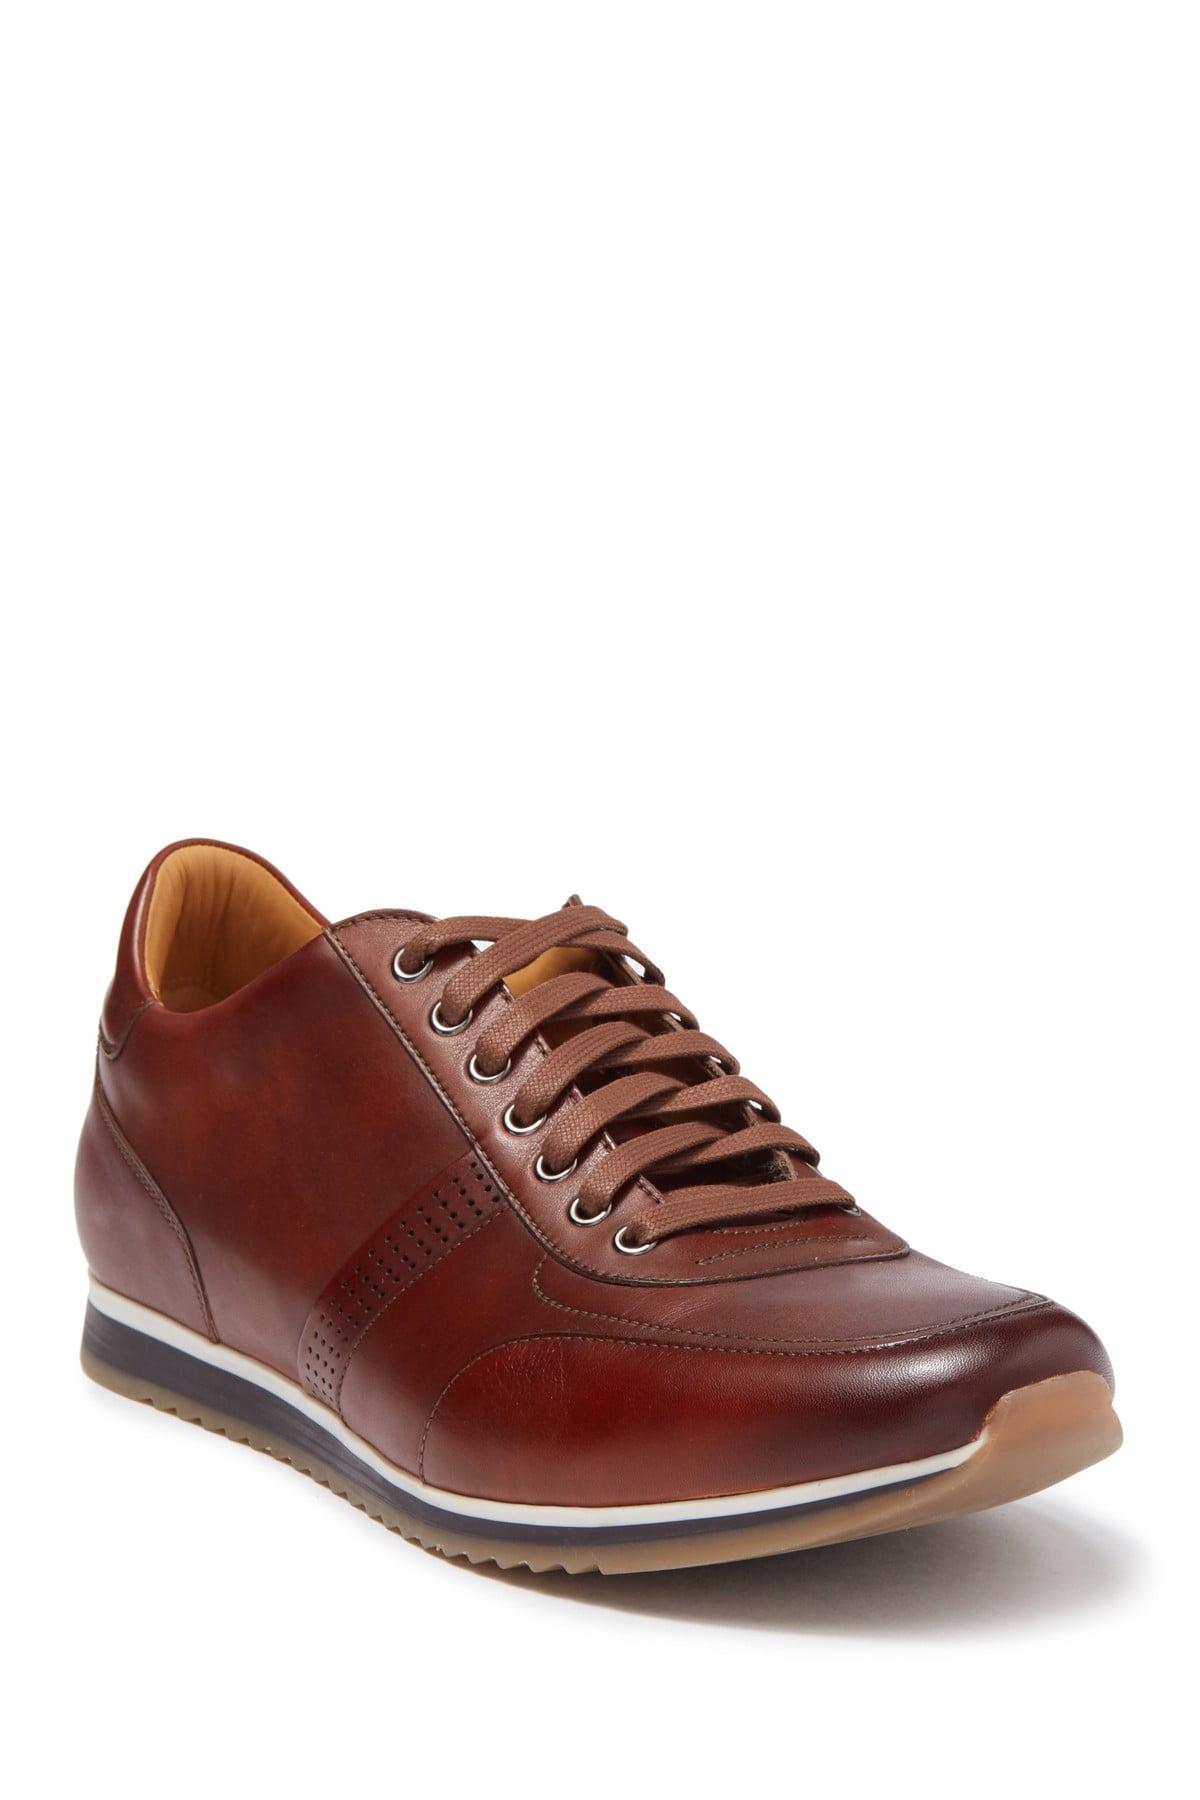 Magnanni Chuck Leather Sneaker in Cognac (Brown) for Men - Lyst